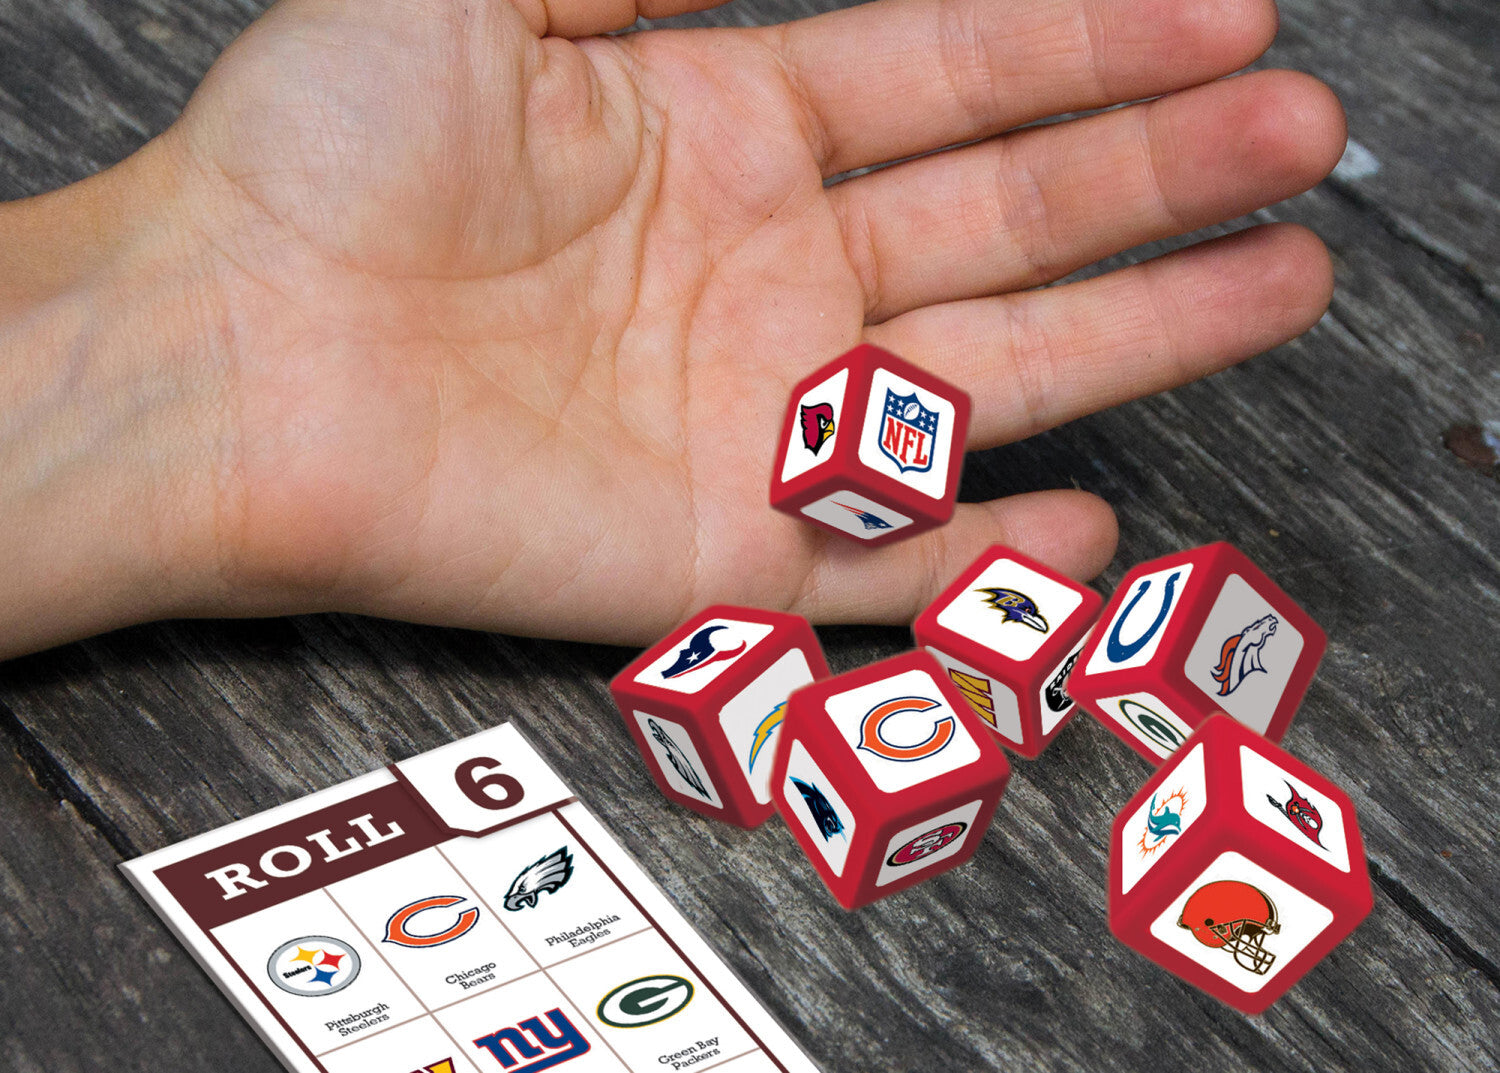 NFL All Teams Fanzy Dice Game